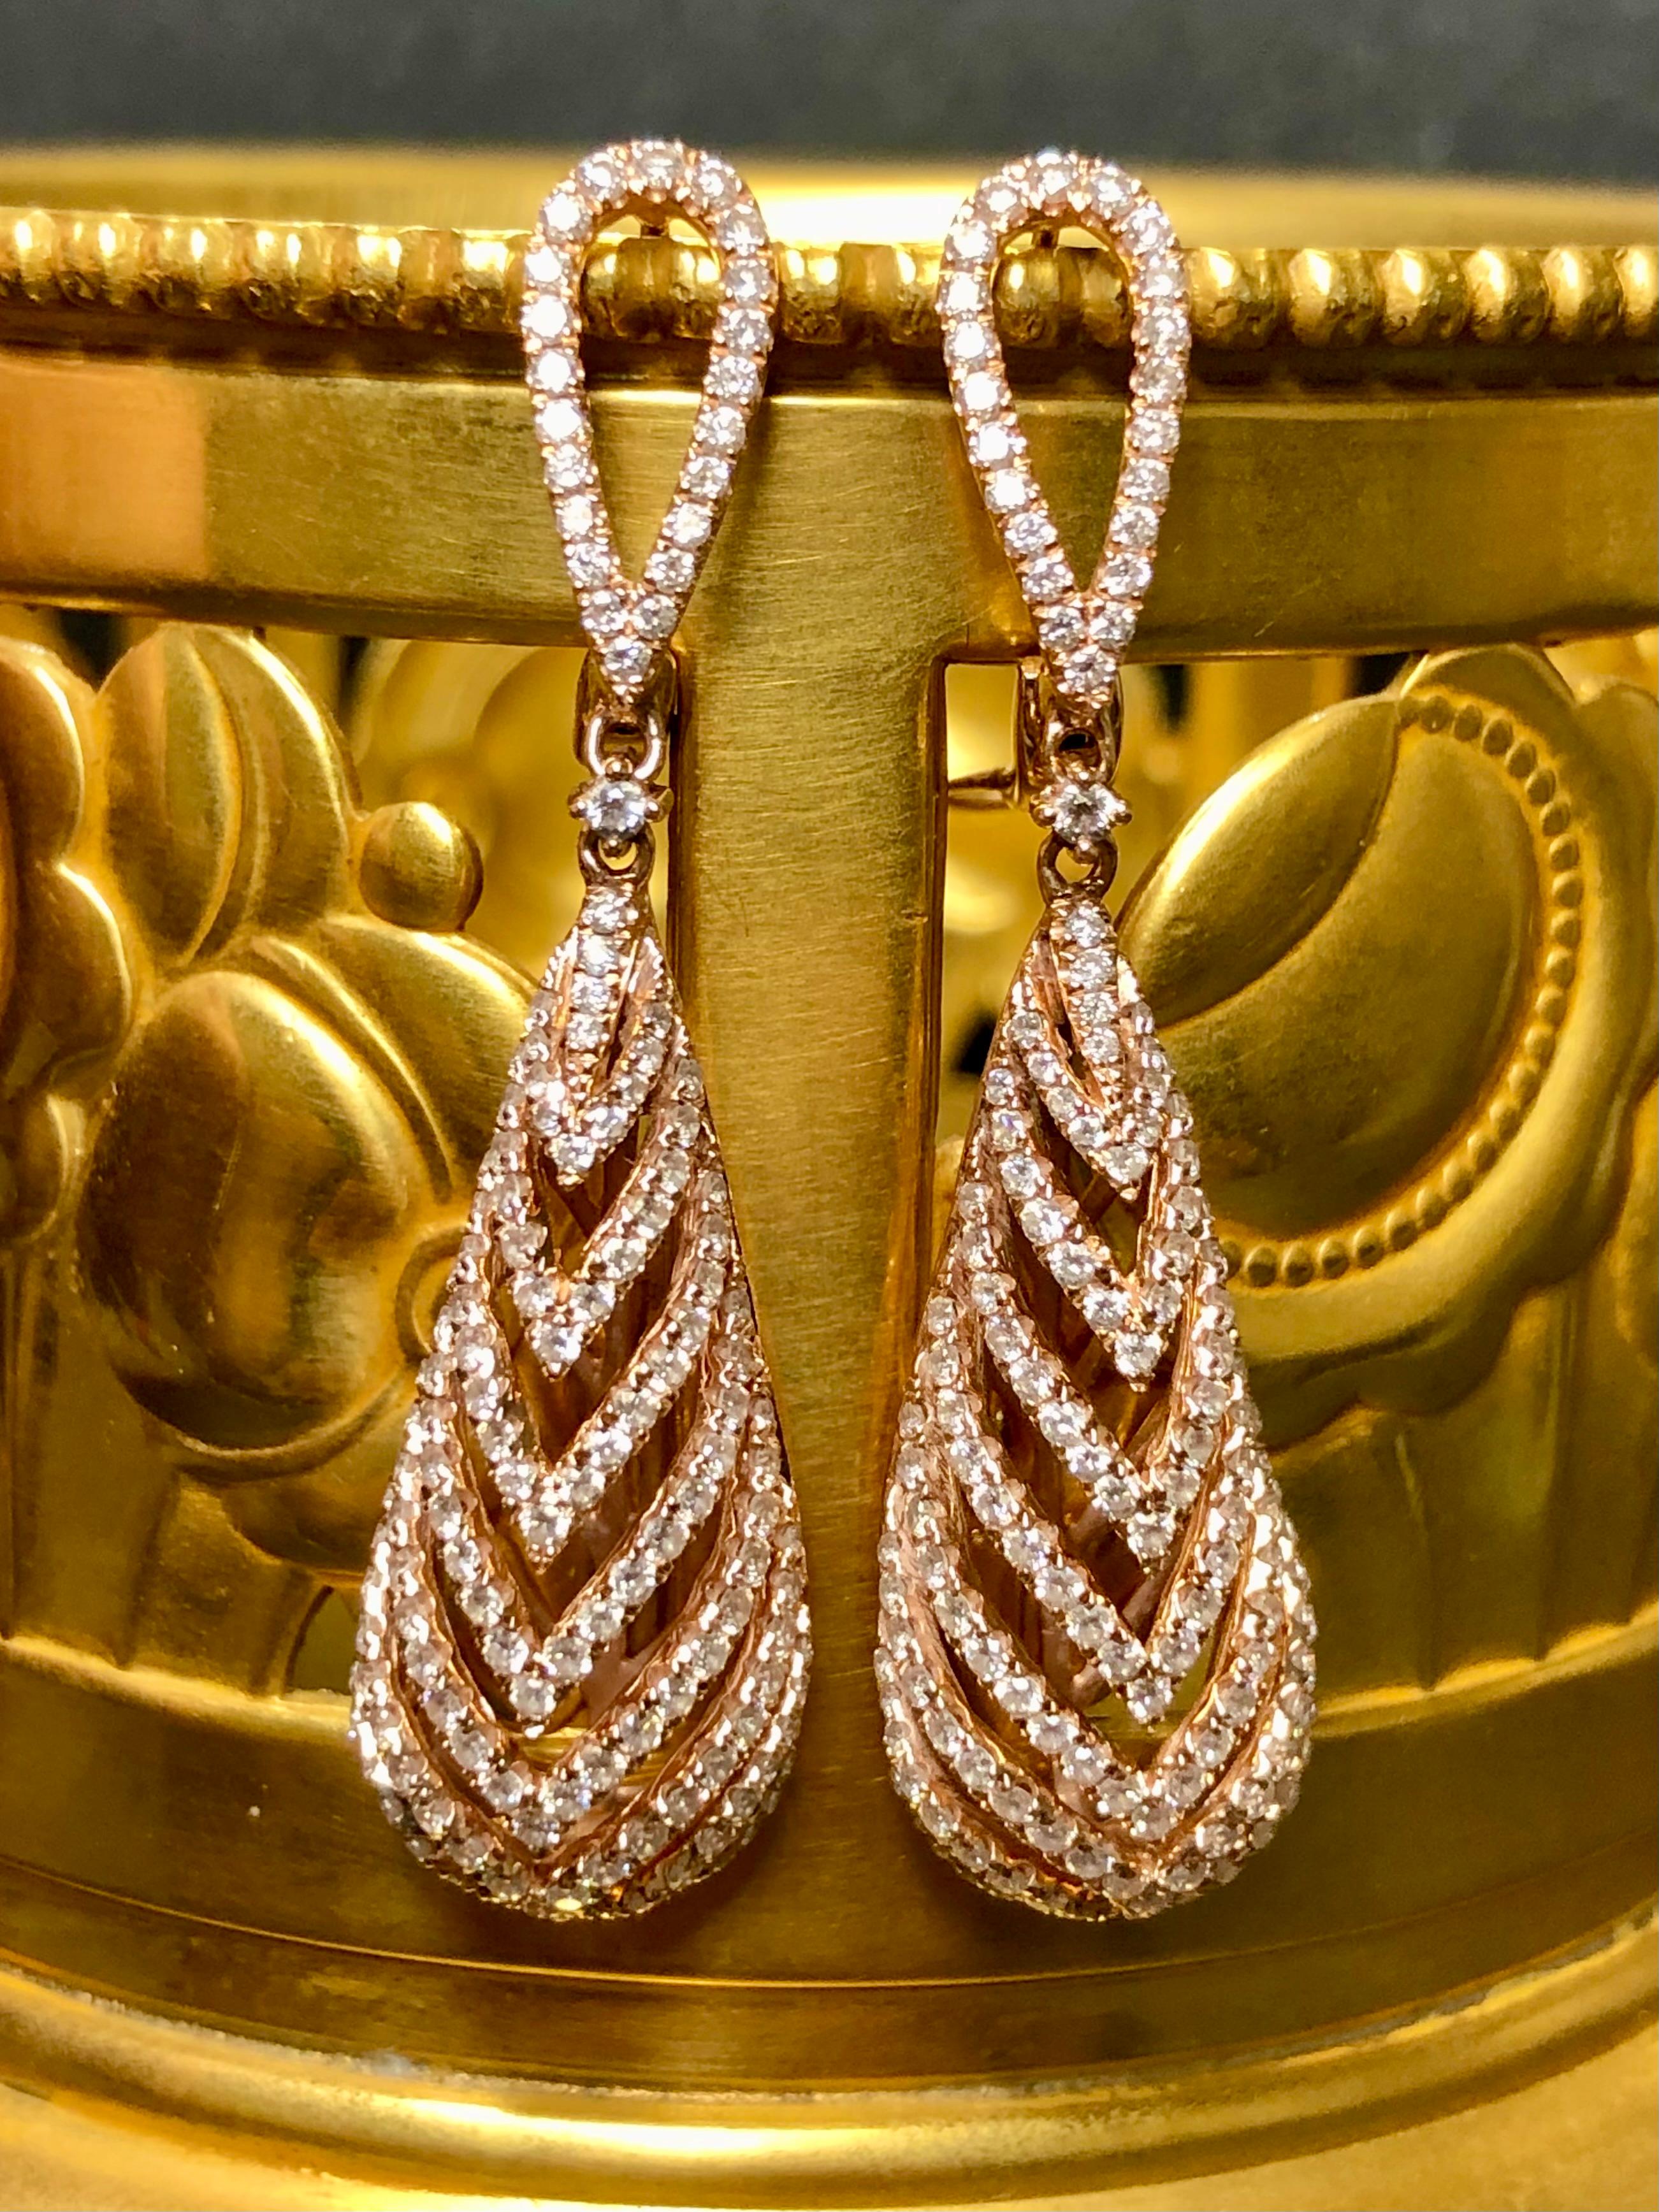 
A beautiful pair of drop earrings done in 14K rose gold bead set with approximately 3.20cttw in G-I color Vs2-Si1 clarity round diamonds. The stunning earrings have posts with lever backs.


Dimensions/Weight:

Earrings measure 1.70” long and weigh